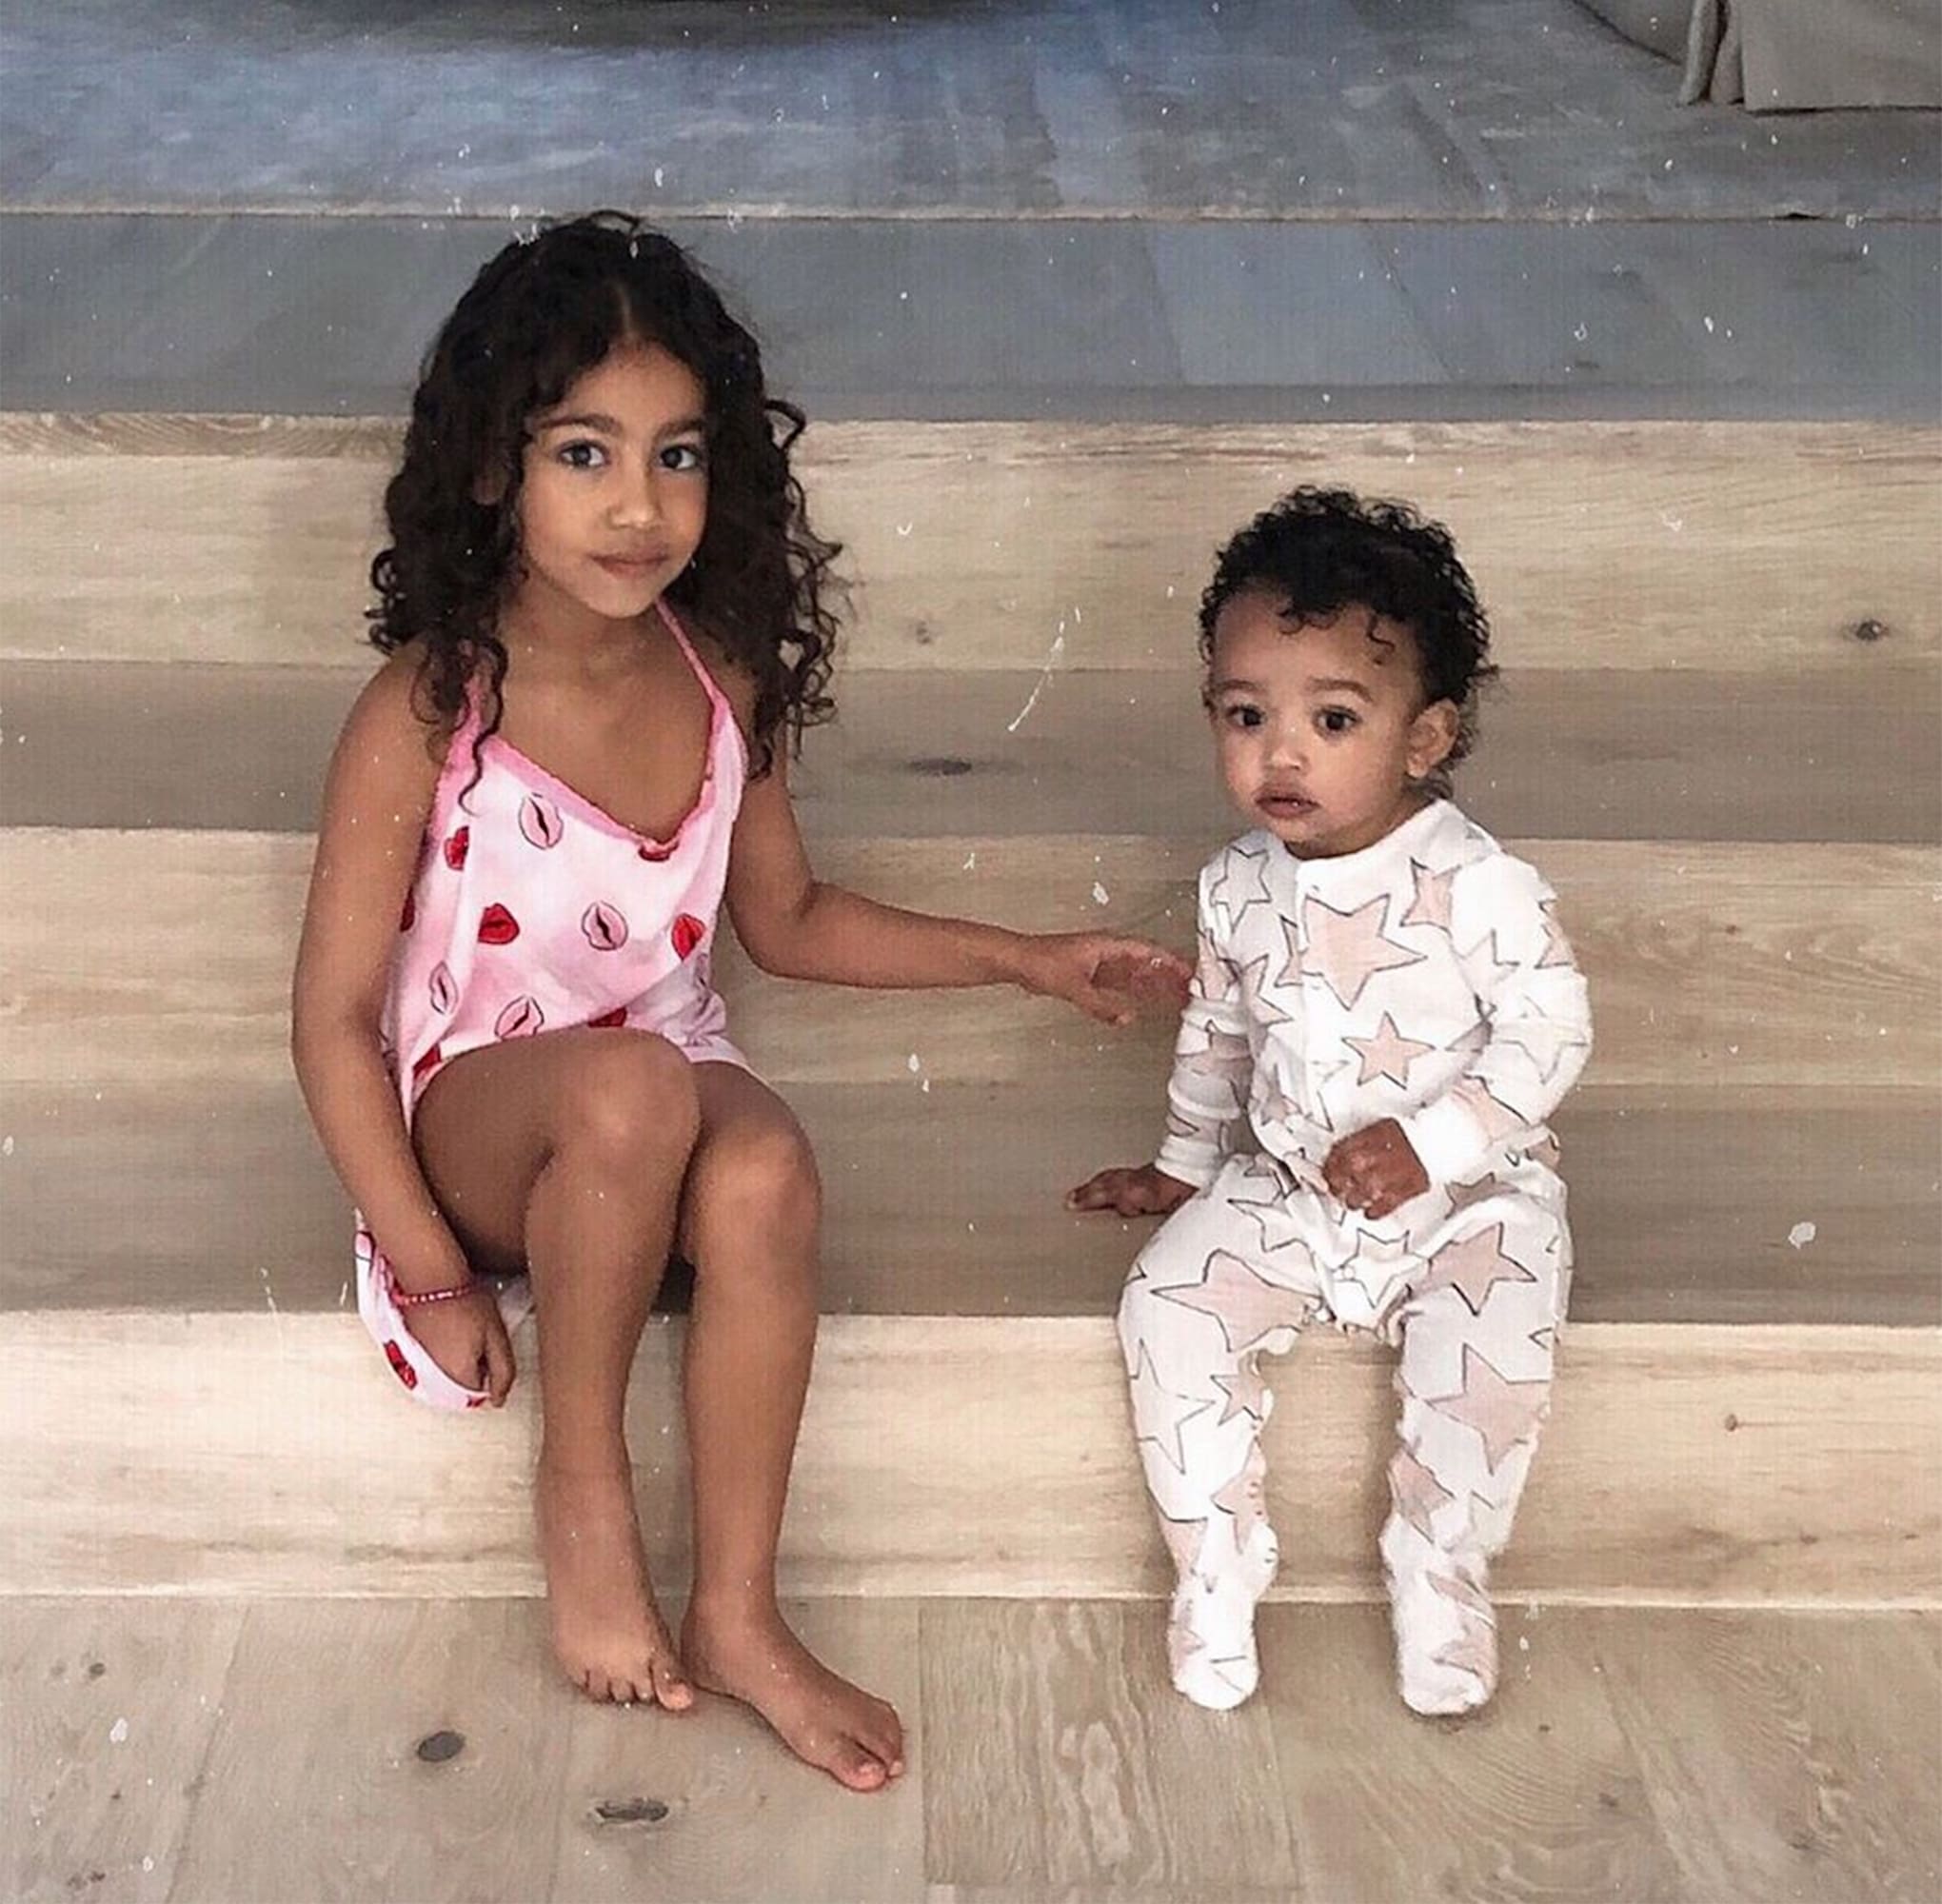 The Recent Video Featuring North And Chicago West, Together With Their Cousin, True Thompson Has Fans In Awe